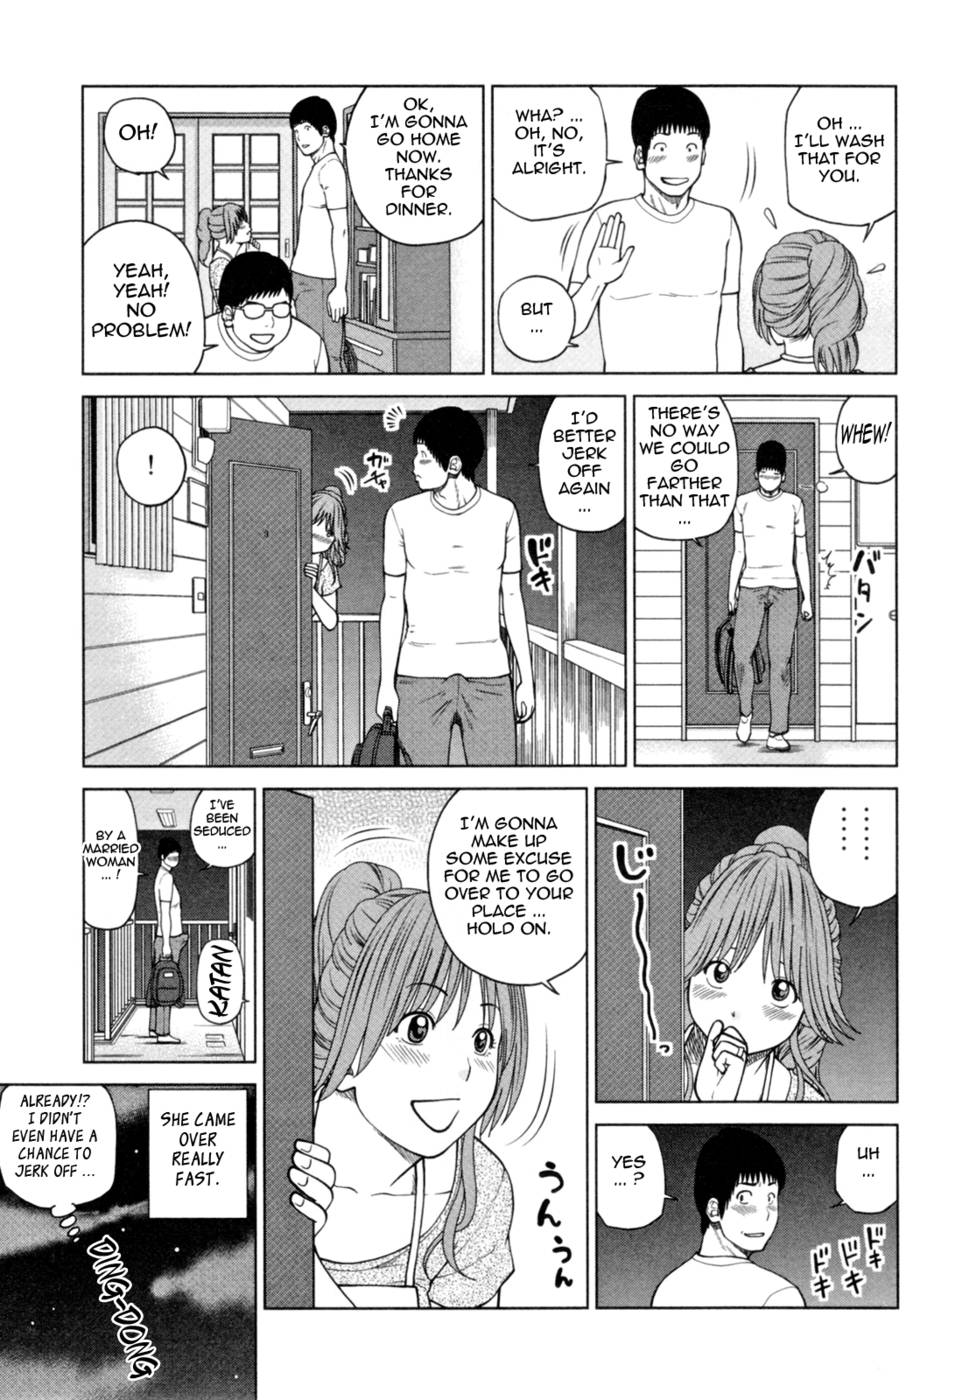 32 Year Old Unsatisfied Wife-Chapter 10-The Wife Next Door-Hentai Manga Hentai Comic pic